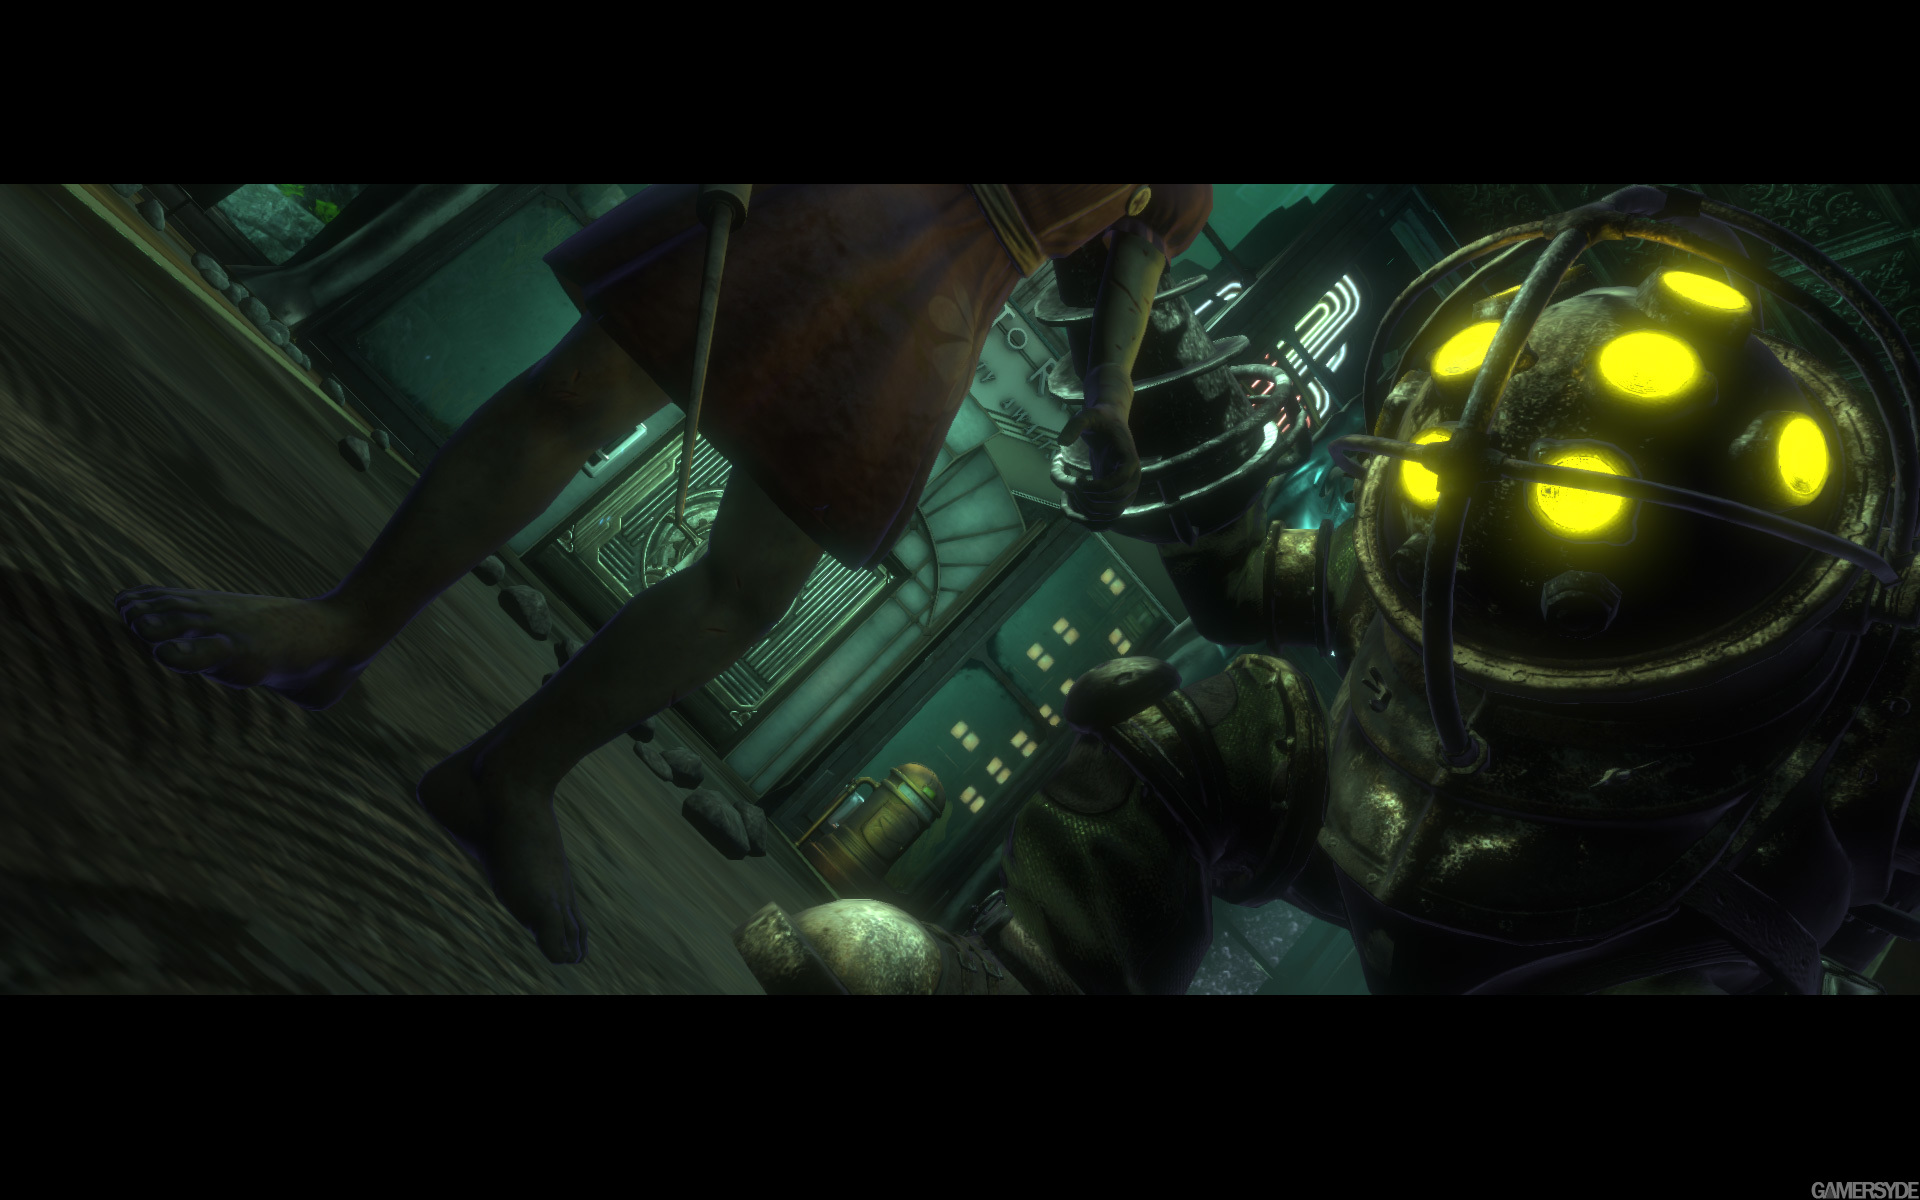 image bioshock the collection-32399-3655 0002